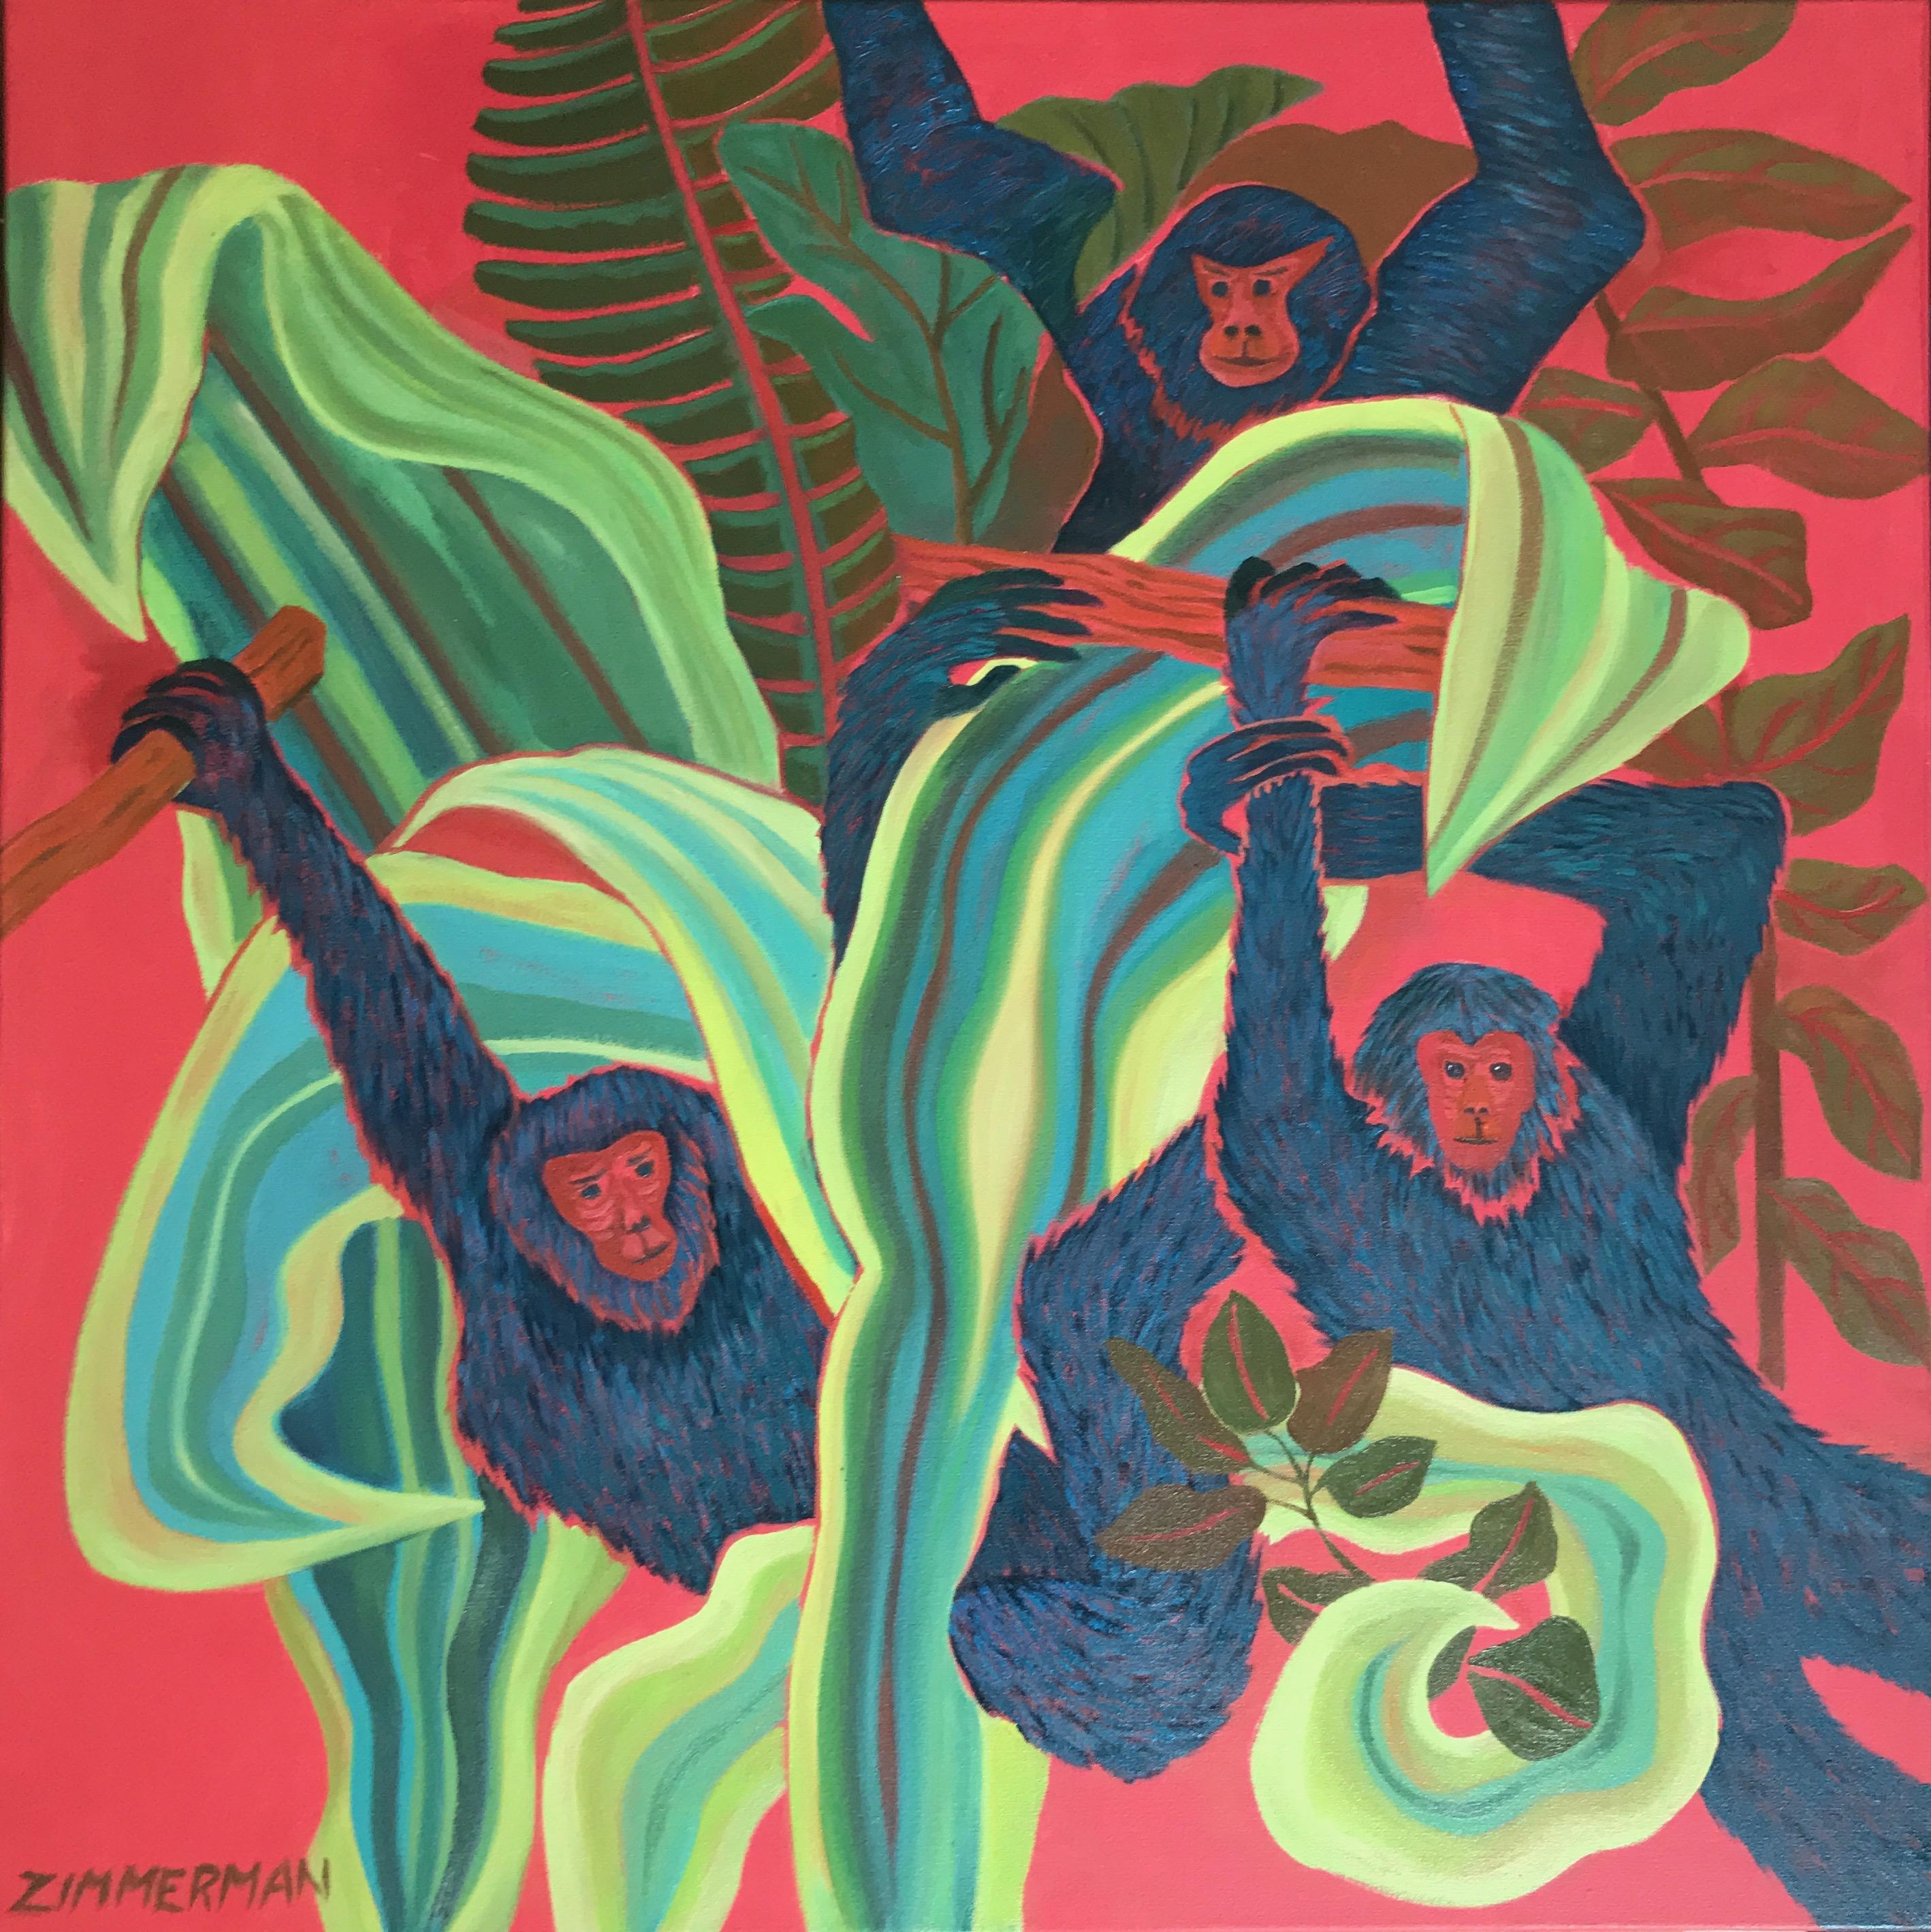 Monkeys at play in a coral backdrop and colorful foliage. Good for reminding us of our playful nature.

Monkeying Around - Animal Paintings - Conceptual Art By Marc Zimmerman

This masterpiece is exhibited in the Zimmerman Gallery, Carmel CA.


Marc